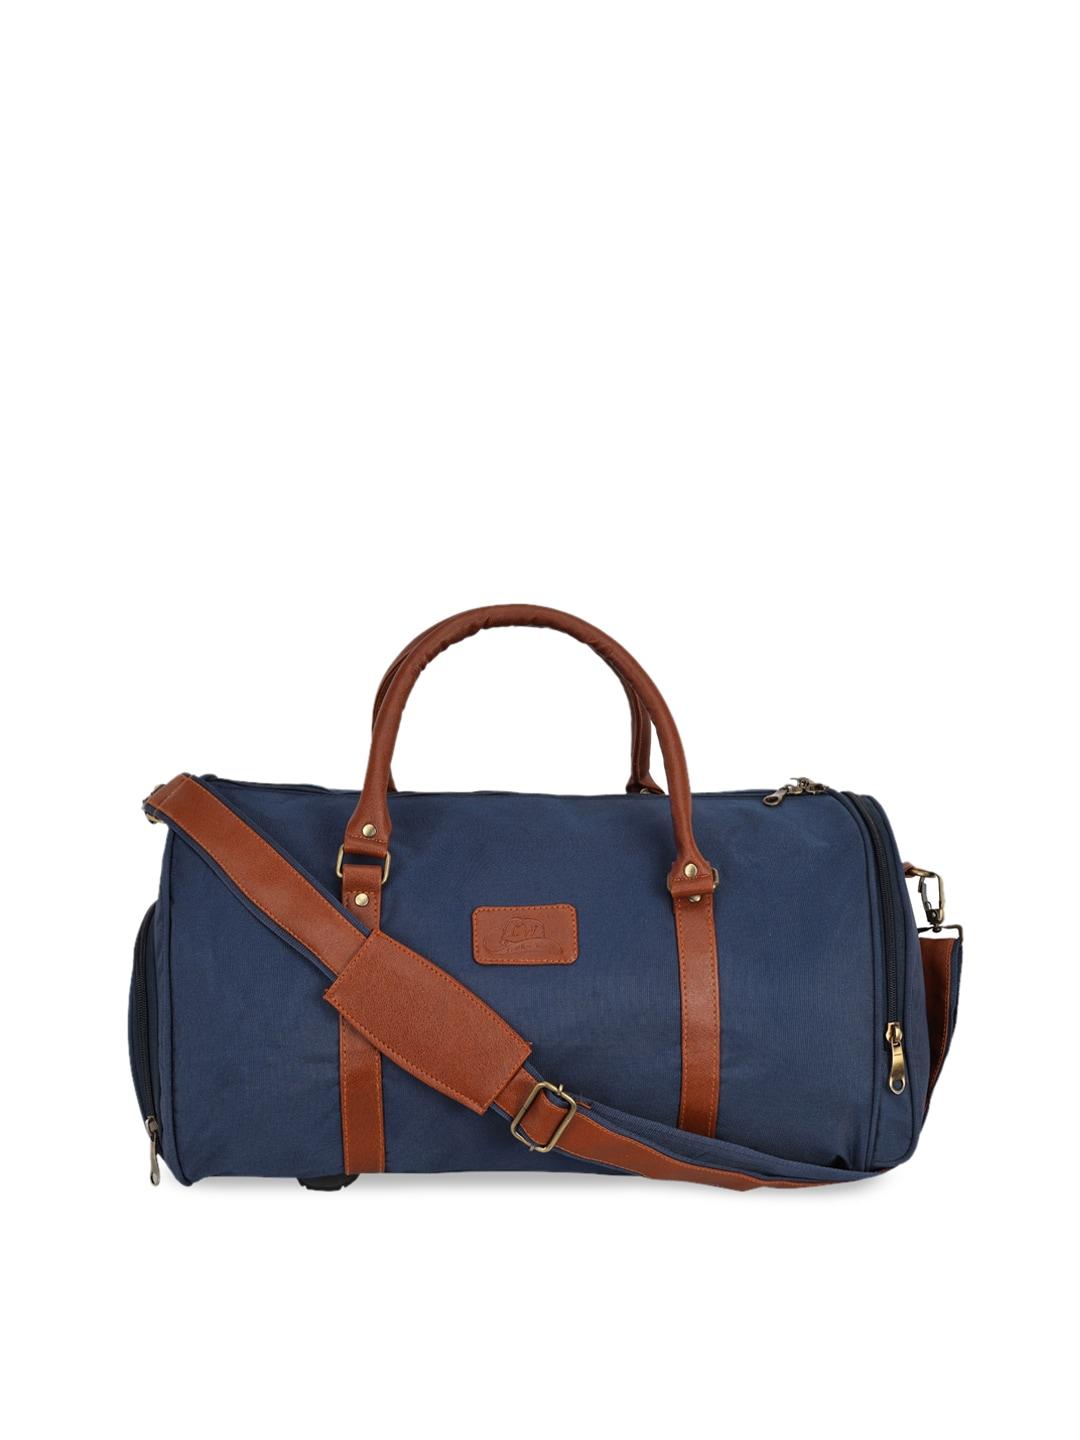 leather world unisex blue & brown solid duffle bag